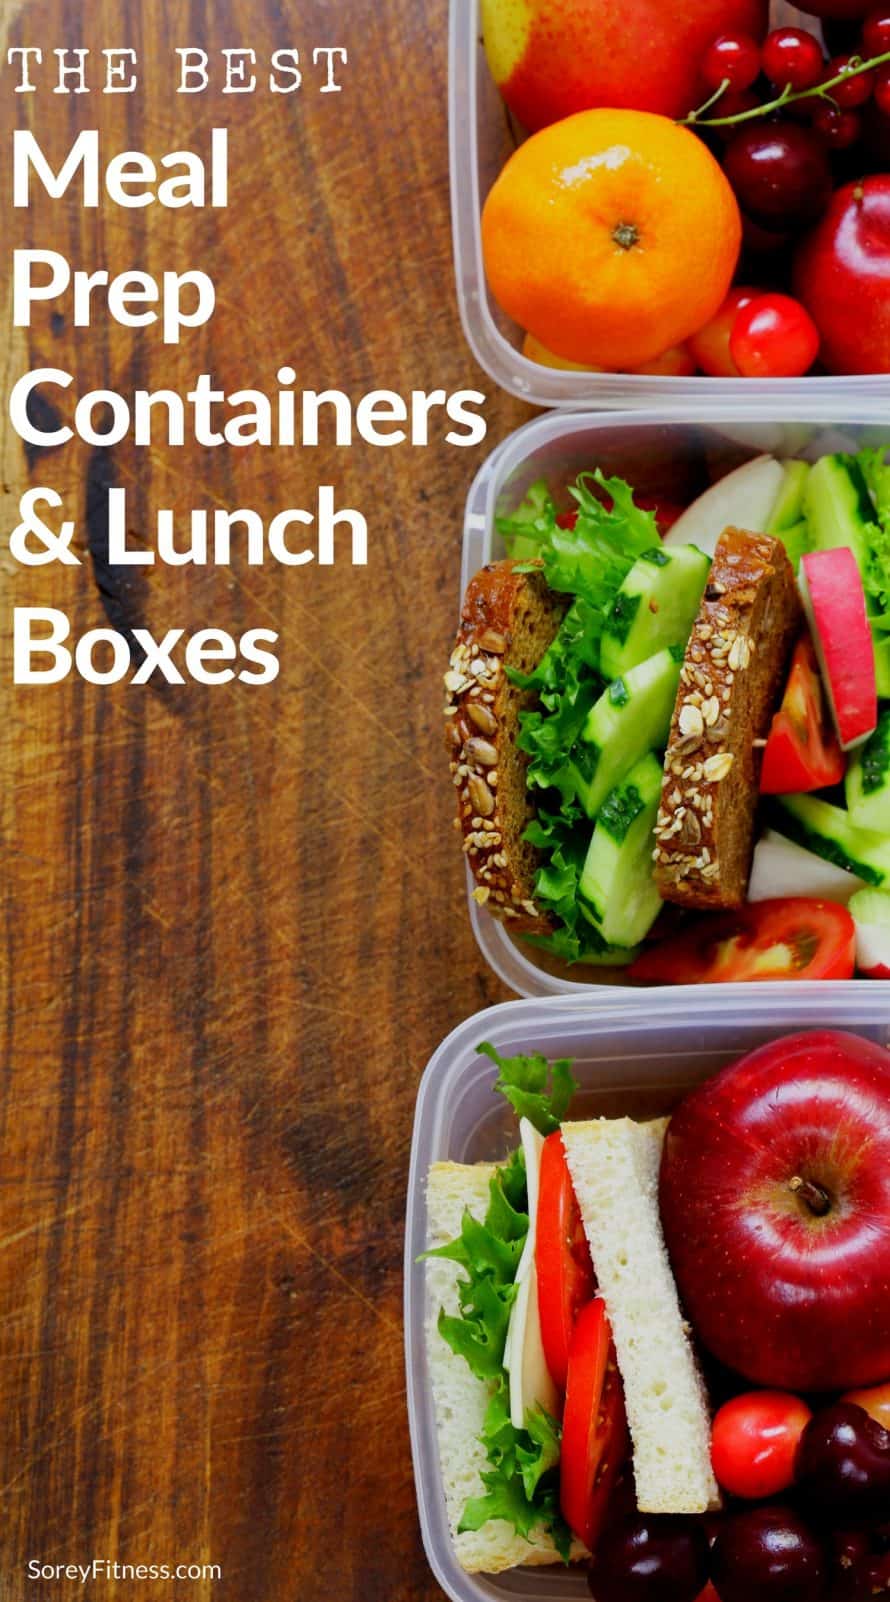 https://soreyfitness.com/wp-content/uploads/2018/04/best-meal-prep-containers-min-890x1602.jpg